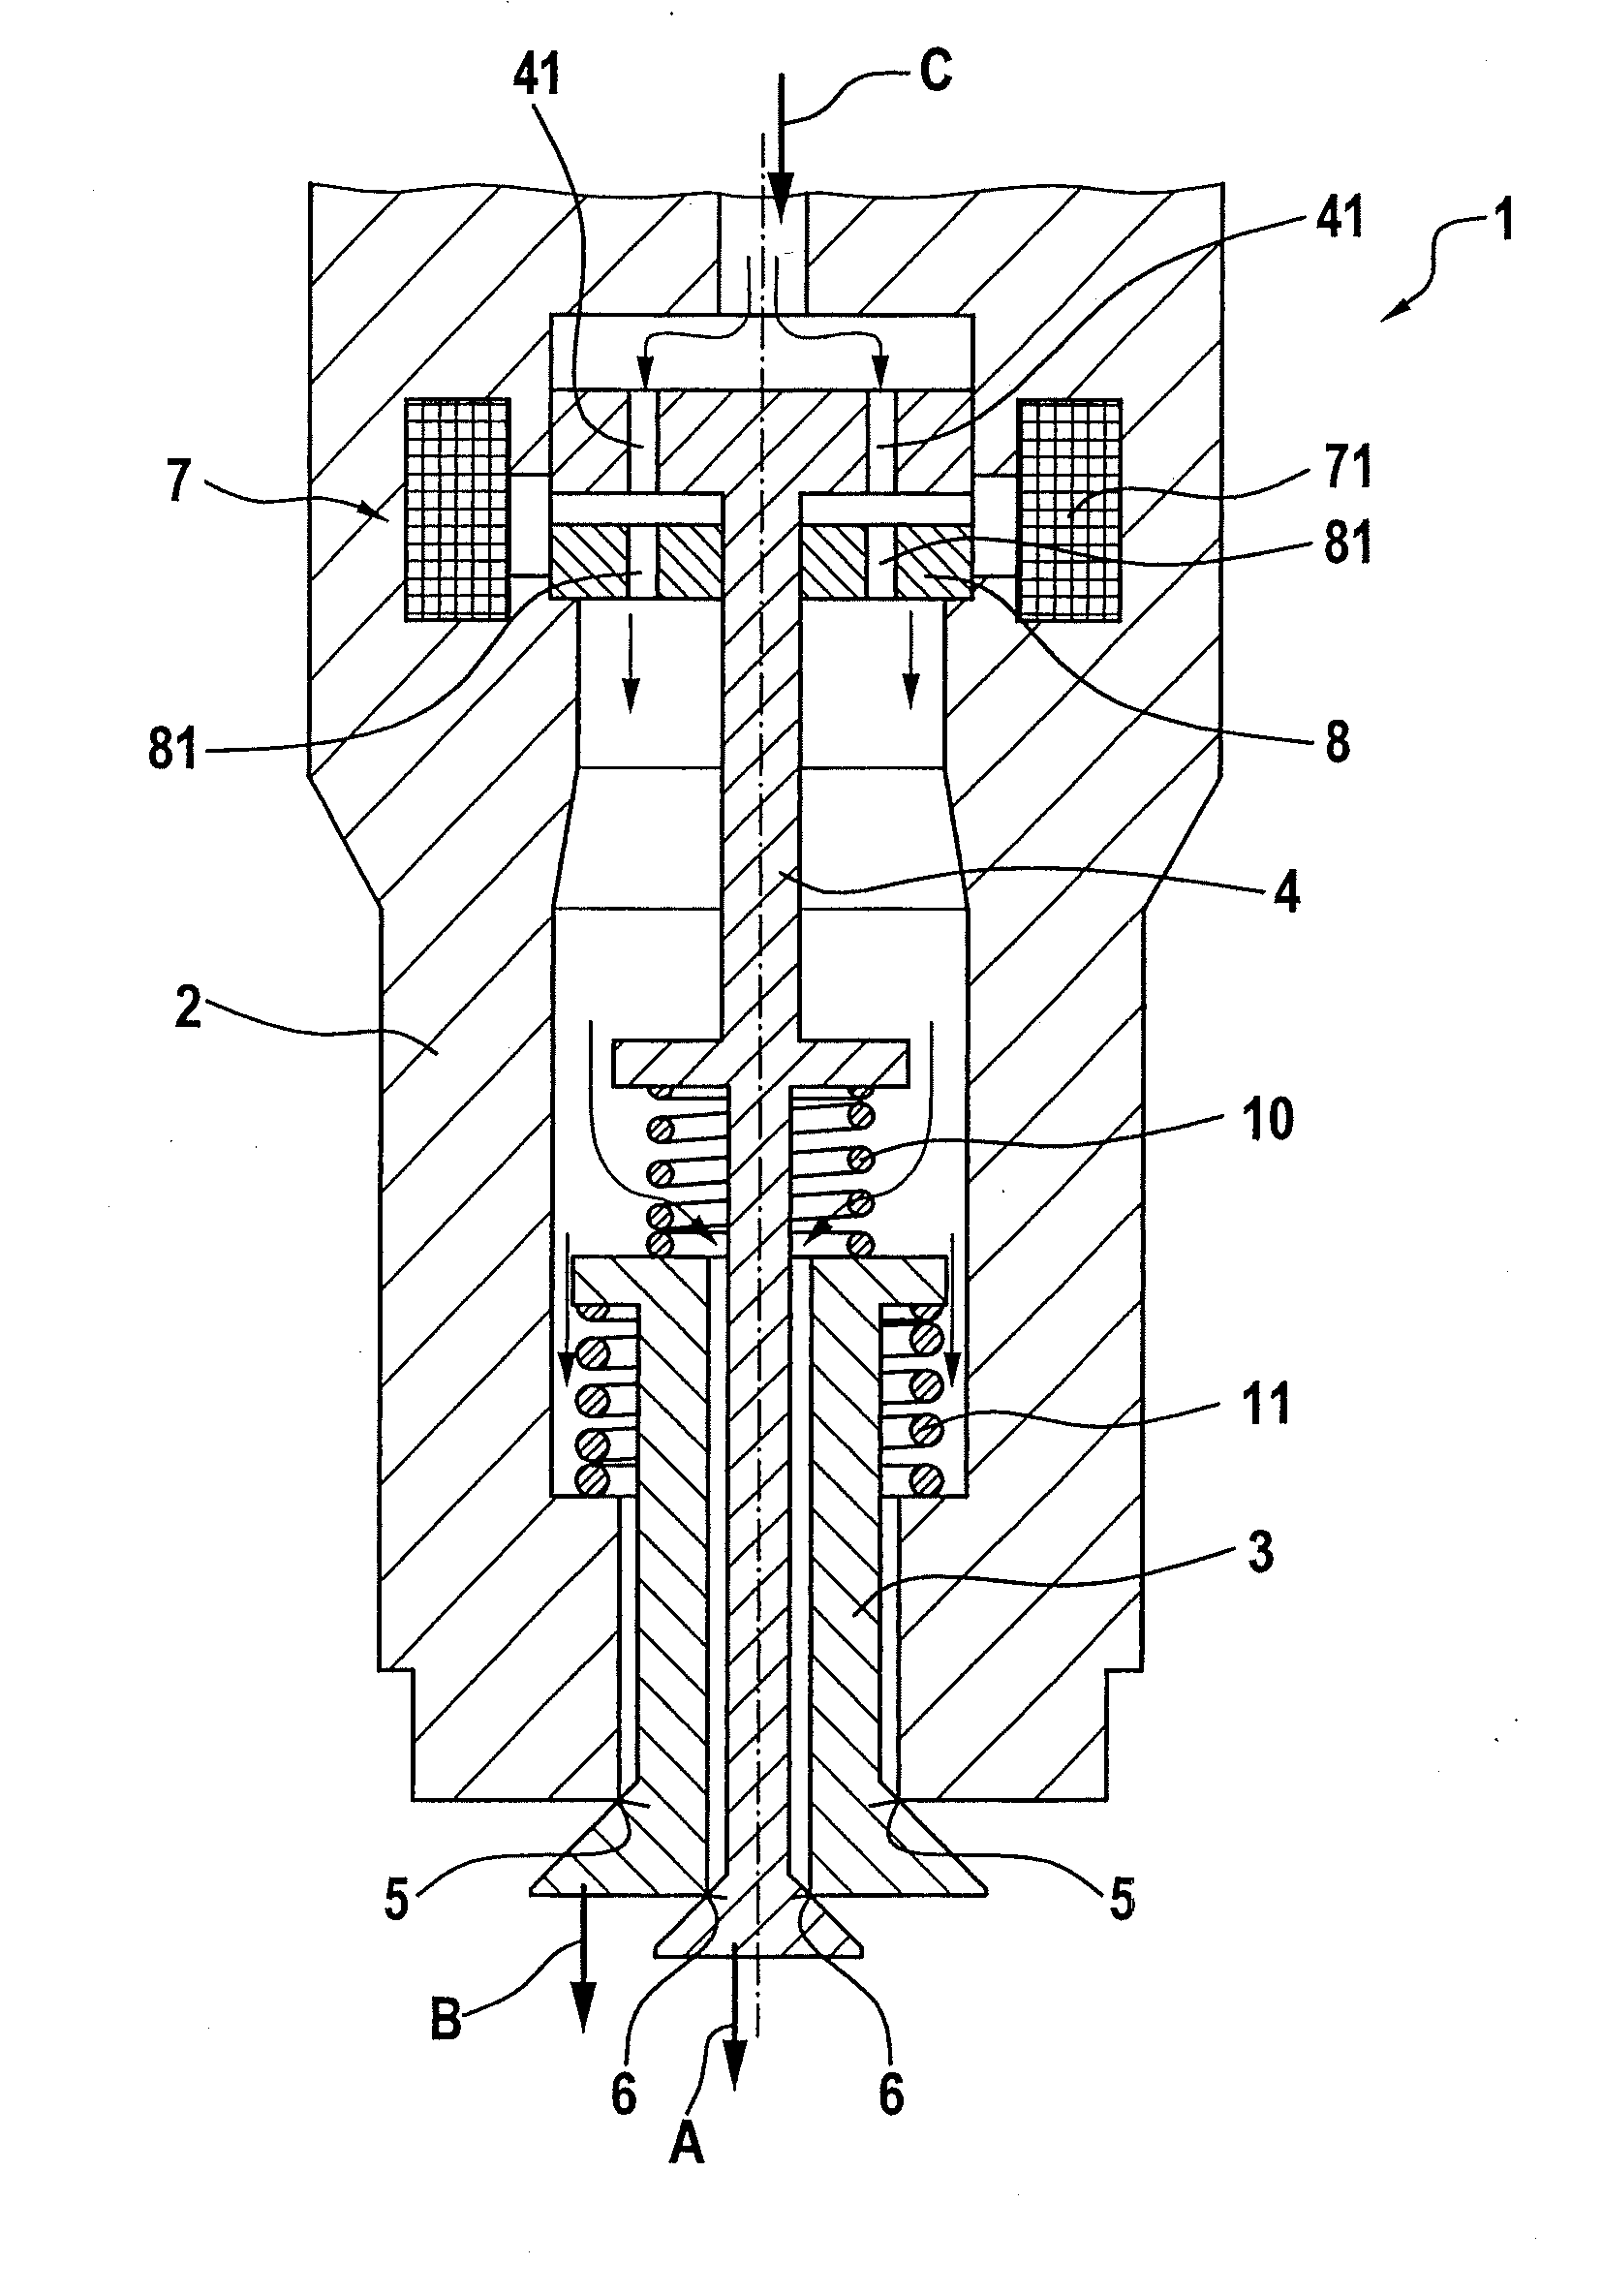 Gas injector having a dual valve needle